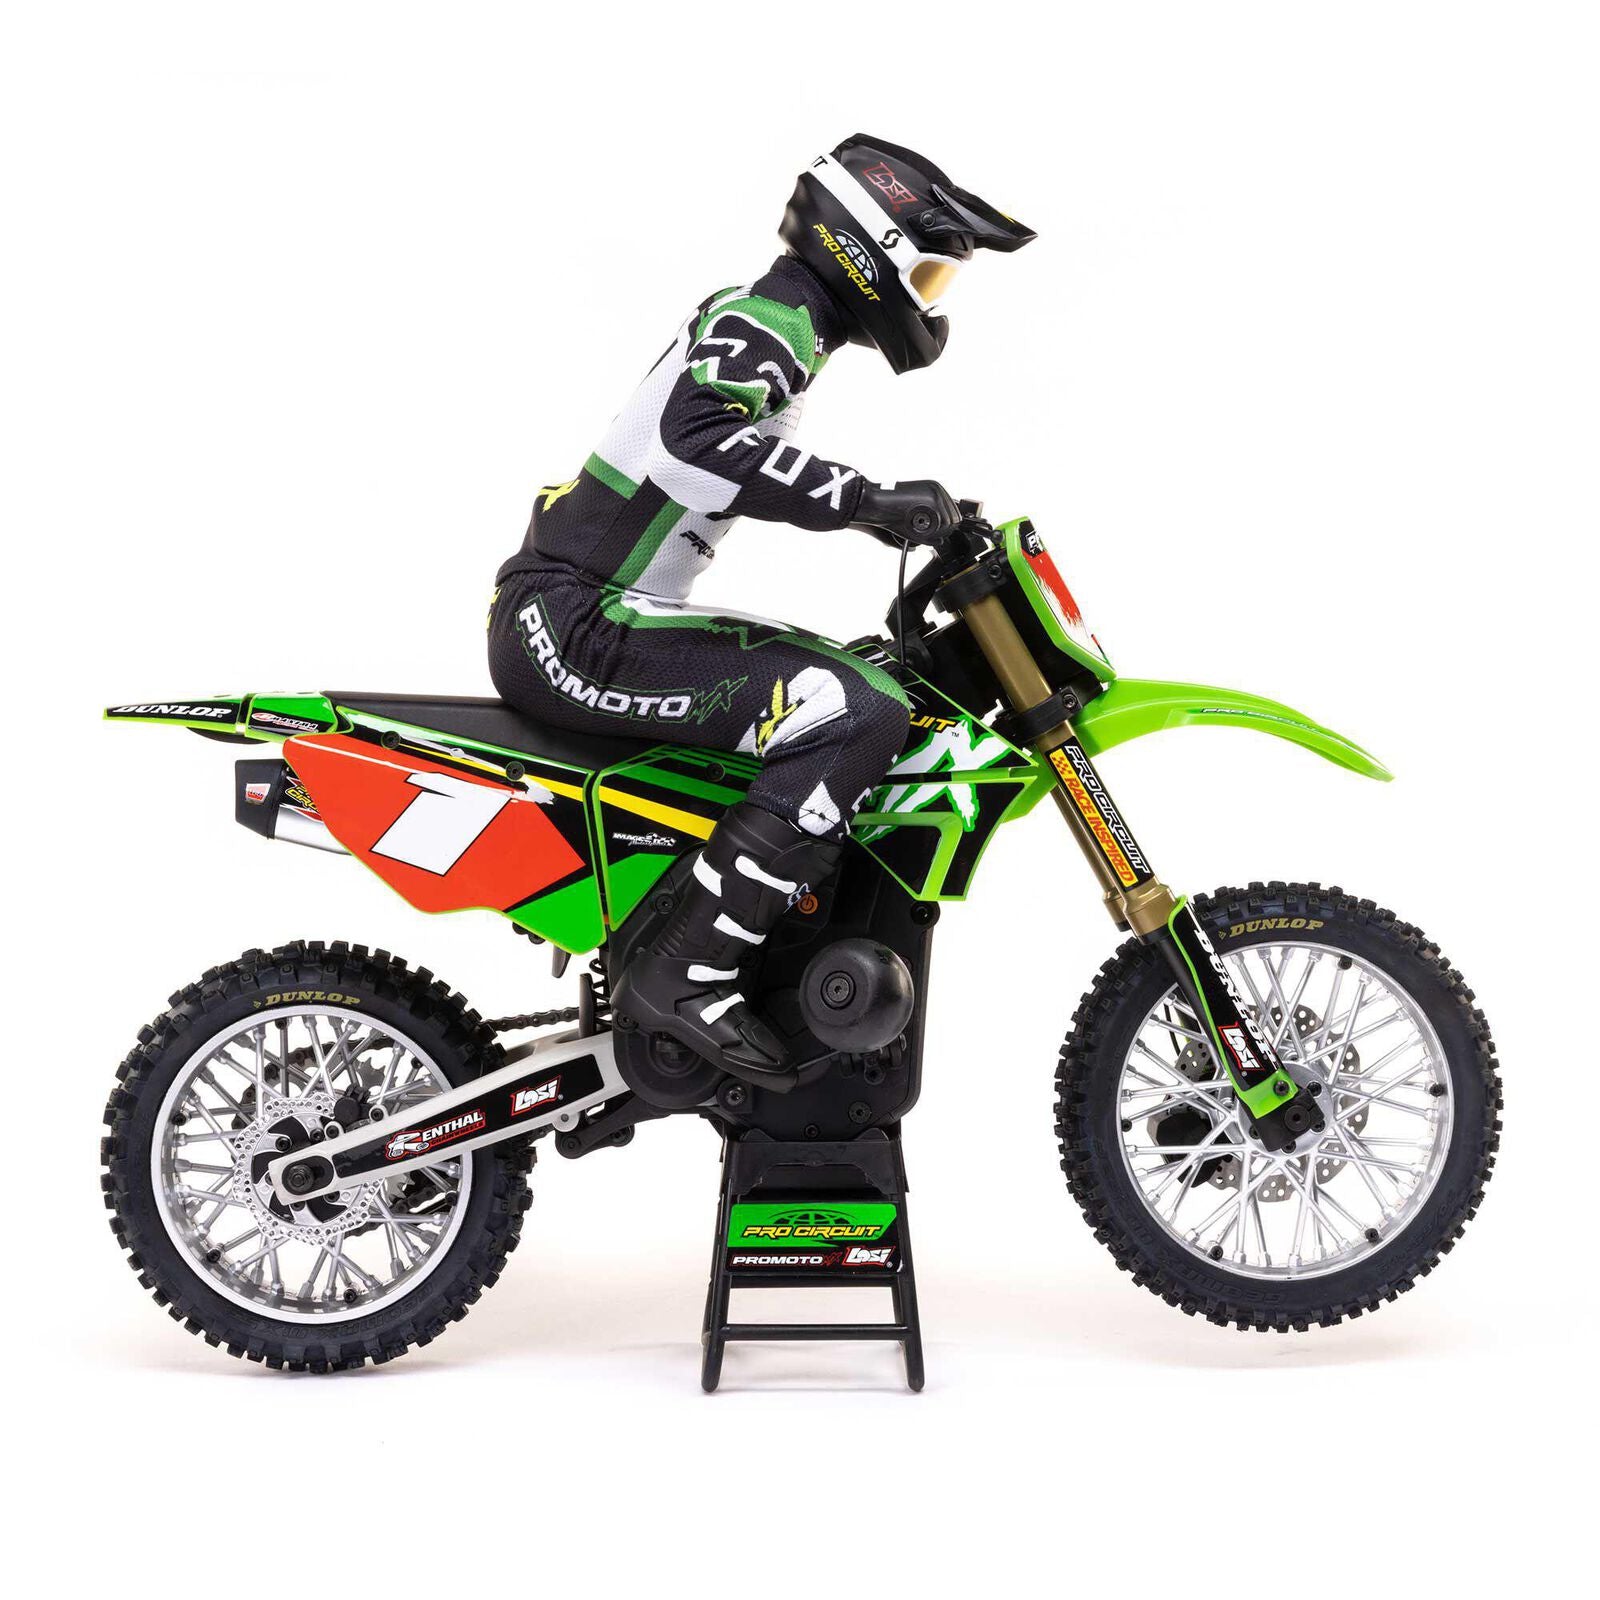 1/4 Promoto-MX Motoycle RTR with Battery and Charger, Pro Circuit